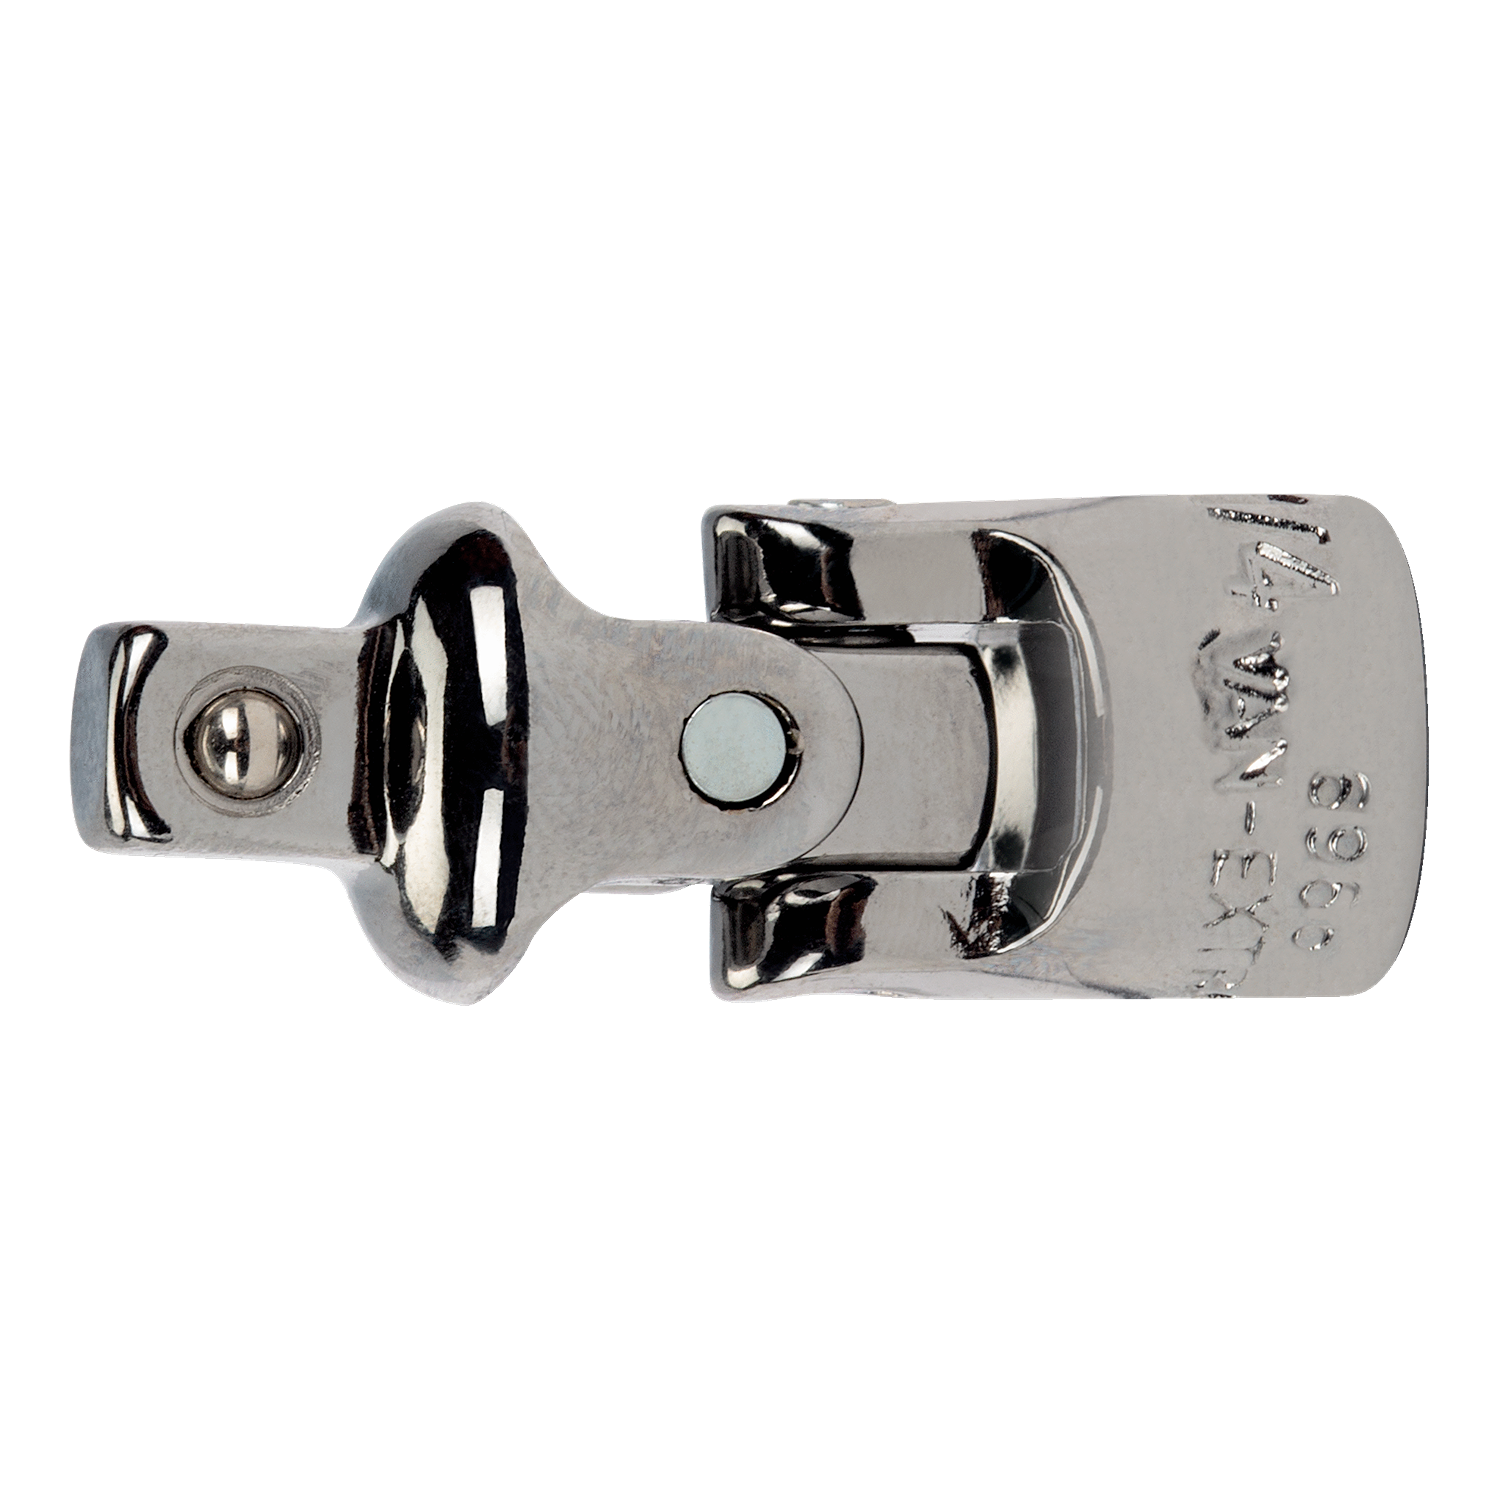 BAHCO 6966 1/4" Square Drive Universal Joint (BAHCO Tools) - Premium Universal Joint from BAHCO - Shop now at Yew Aik.